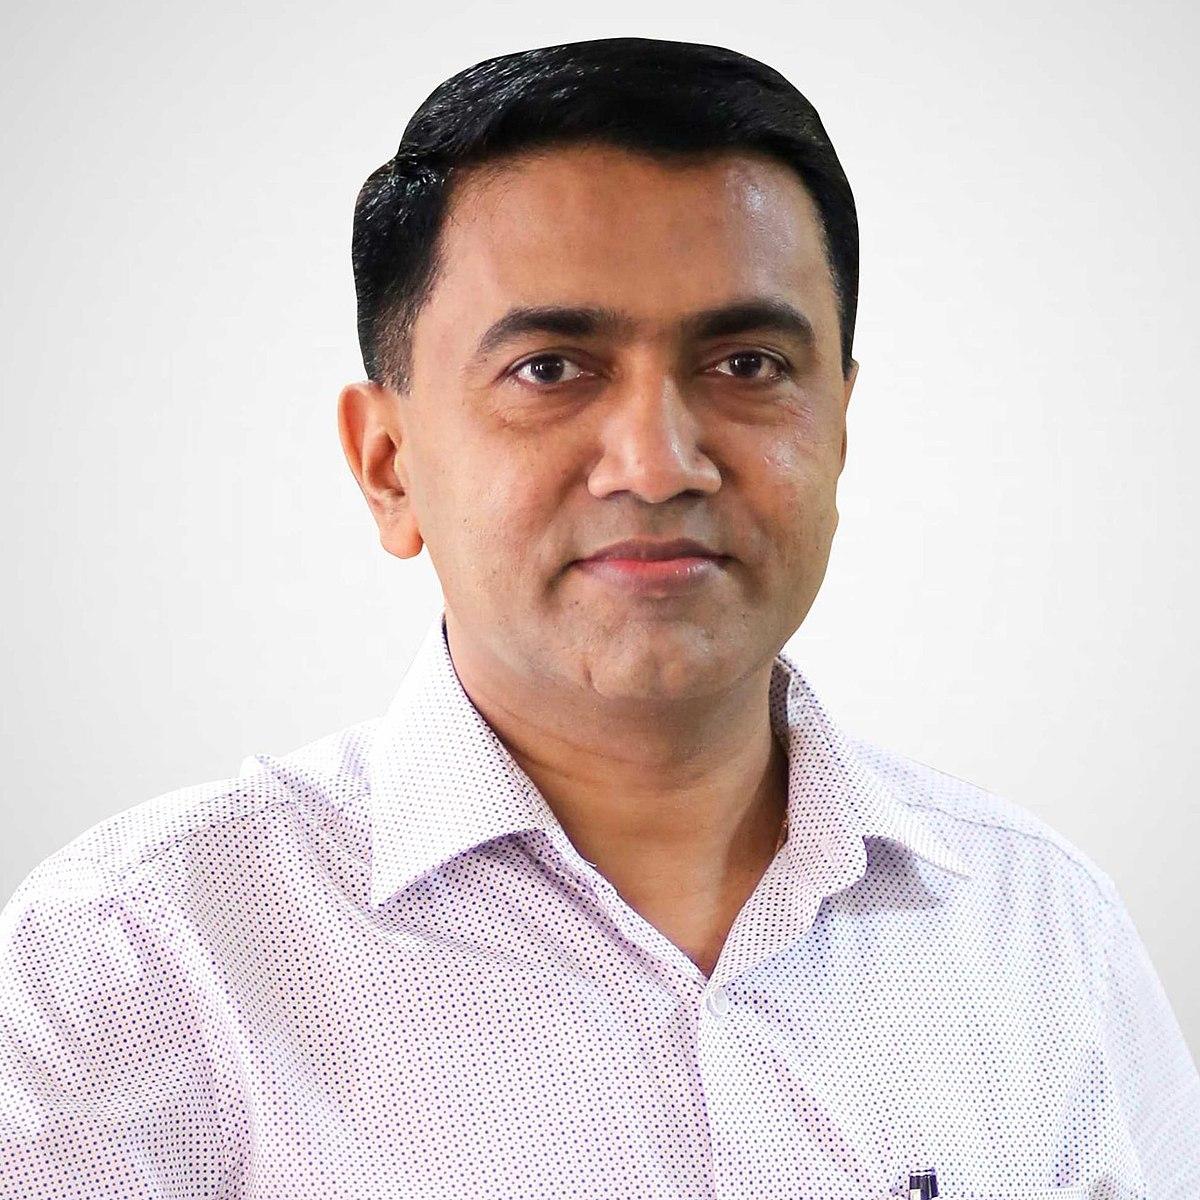 No need for AAP's advice to run schools, says Pramod Sawant